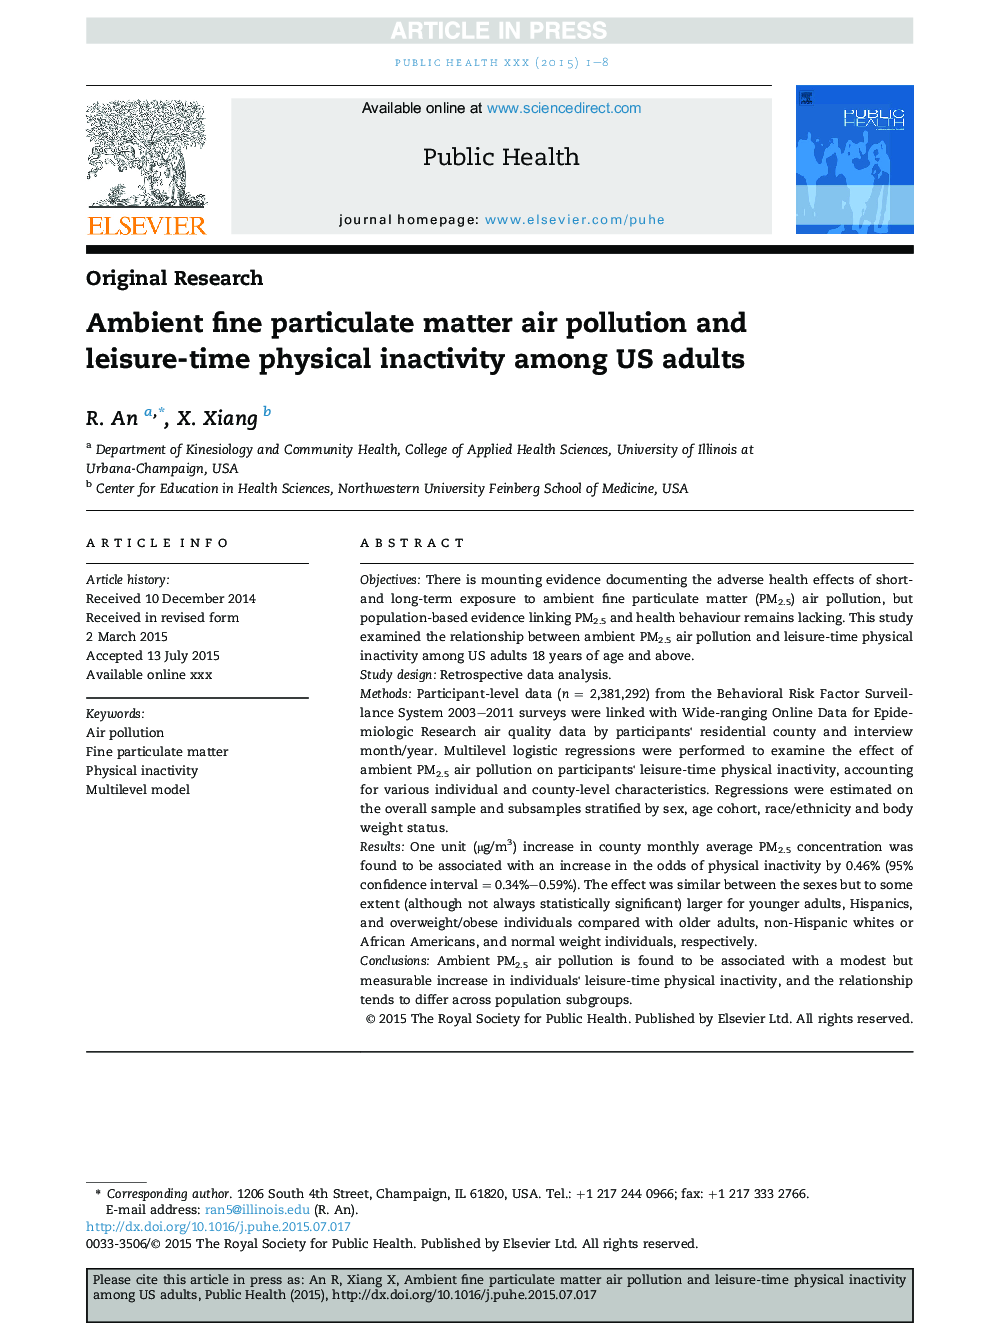 Ambient fine particulate matter air pollution and leisure-time physical inactivity among US adults